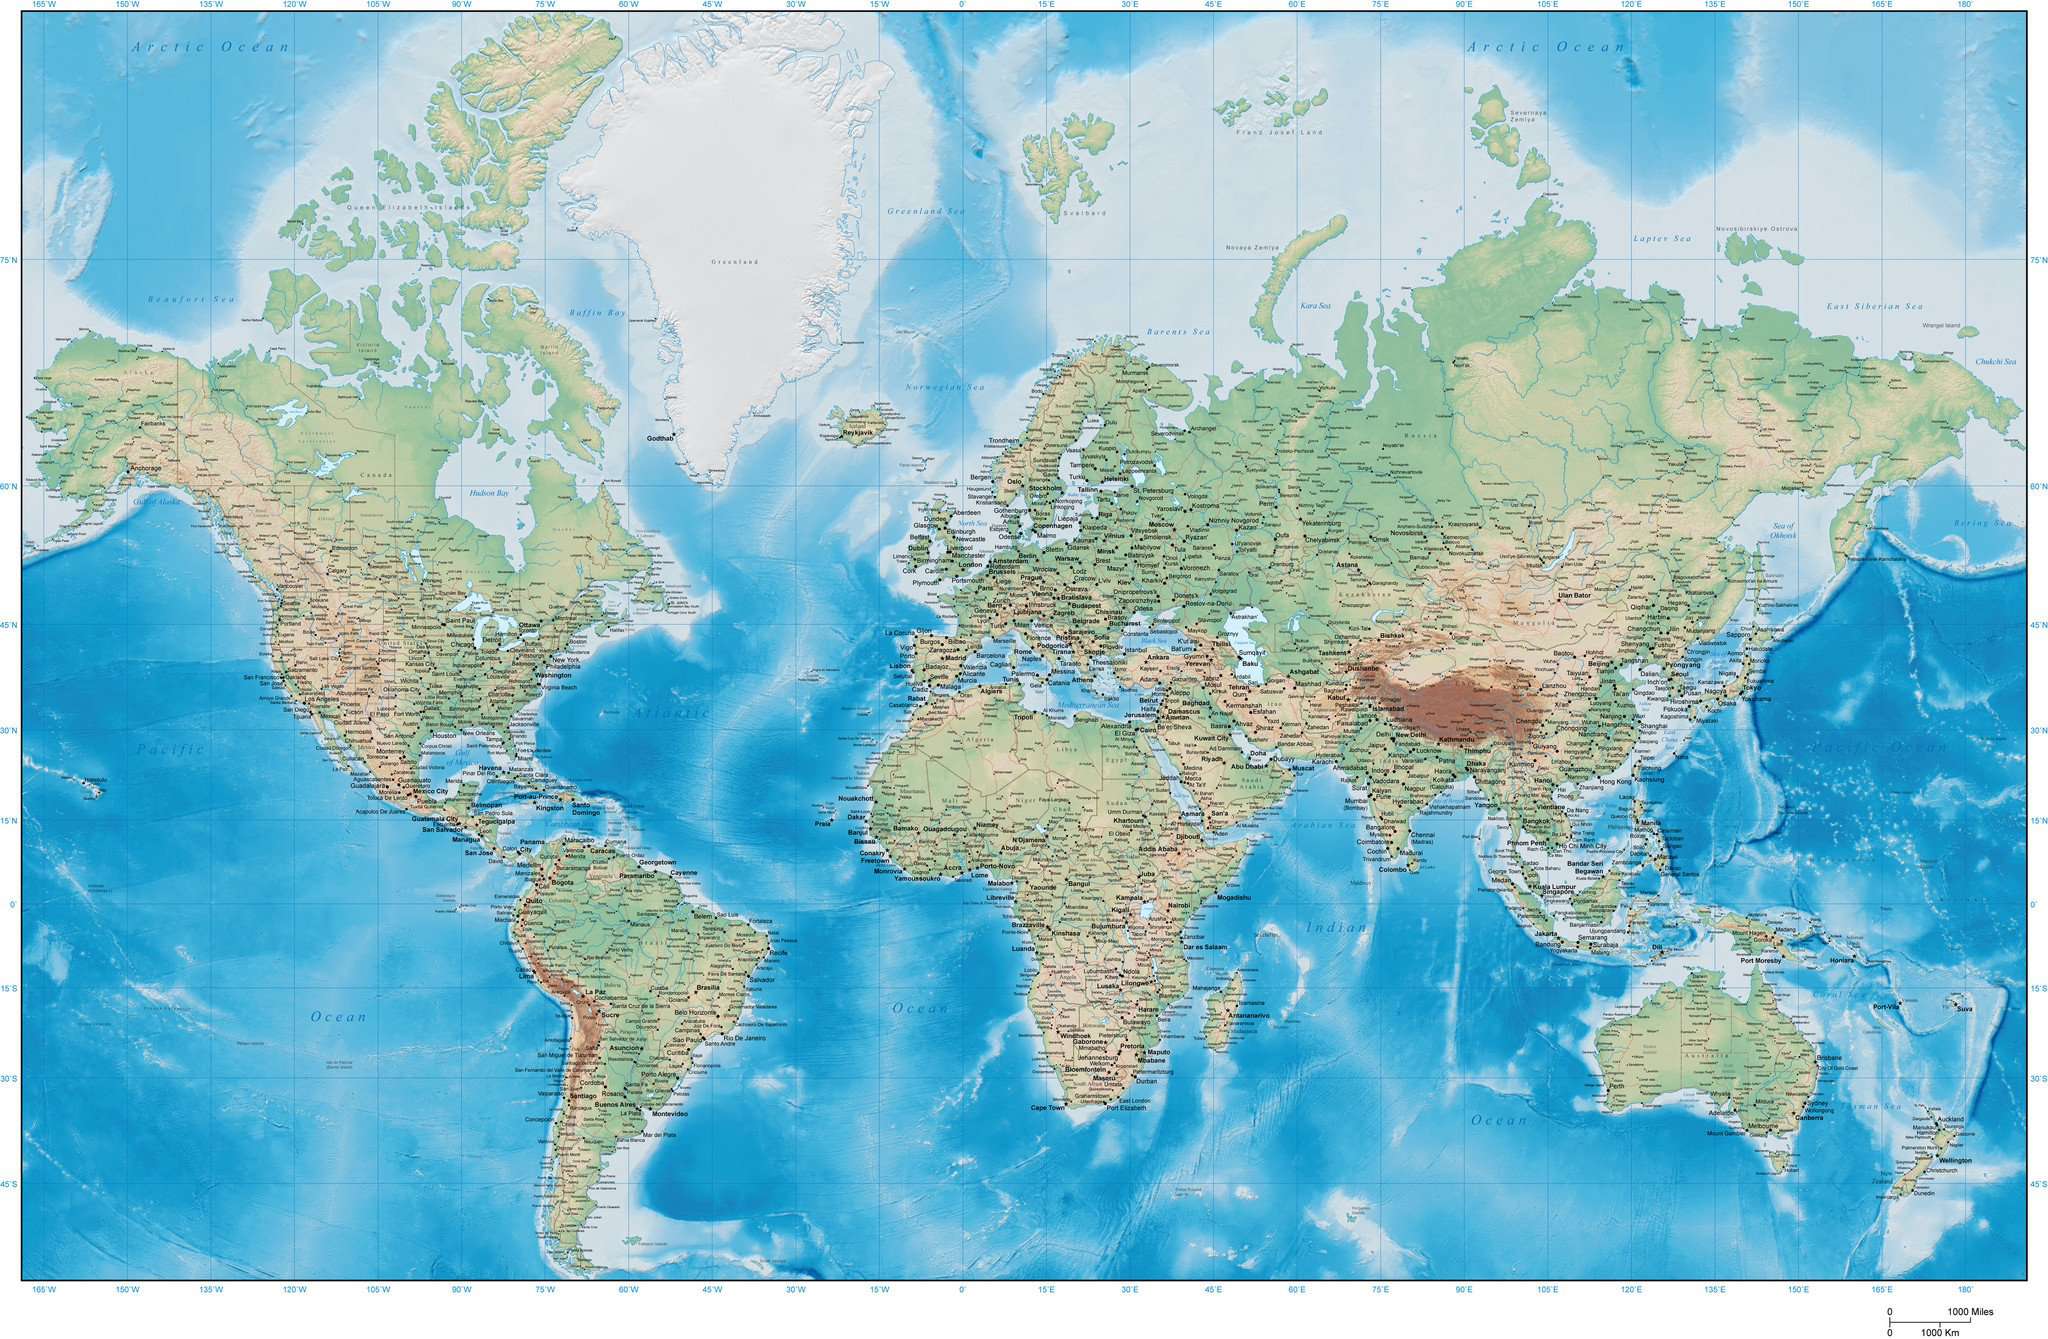 Digital Poster Size This World Map with Terrain in Adobe Illustrator MC-EUR-955410 – Map Resources